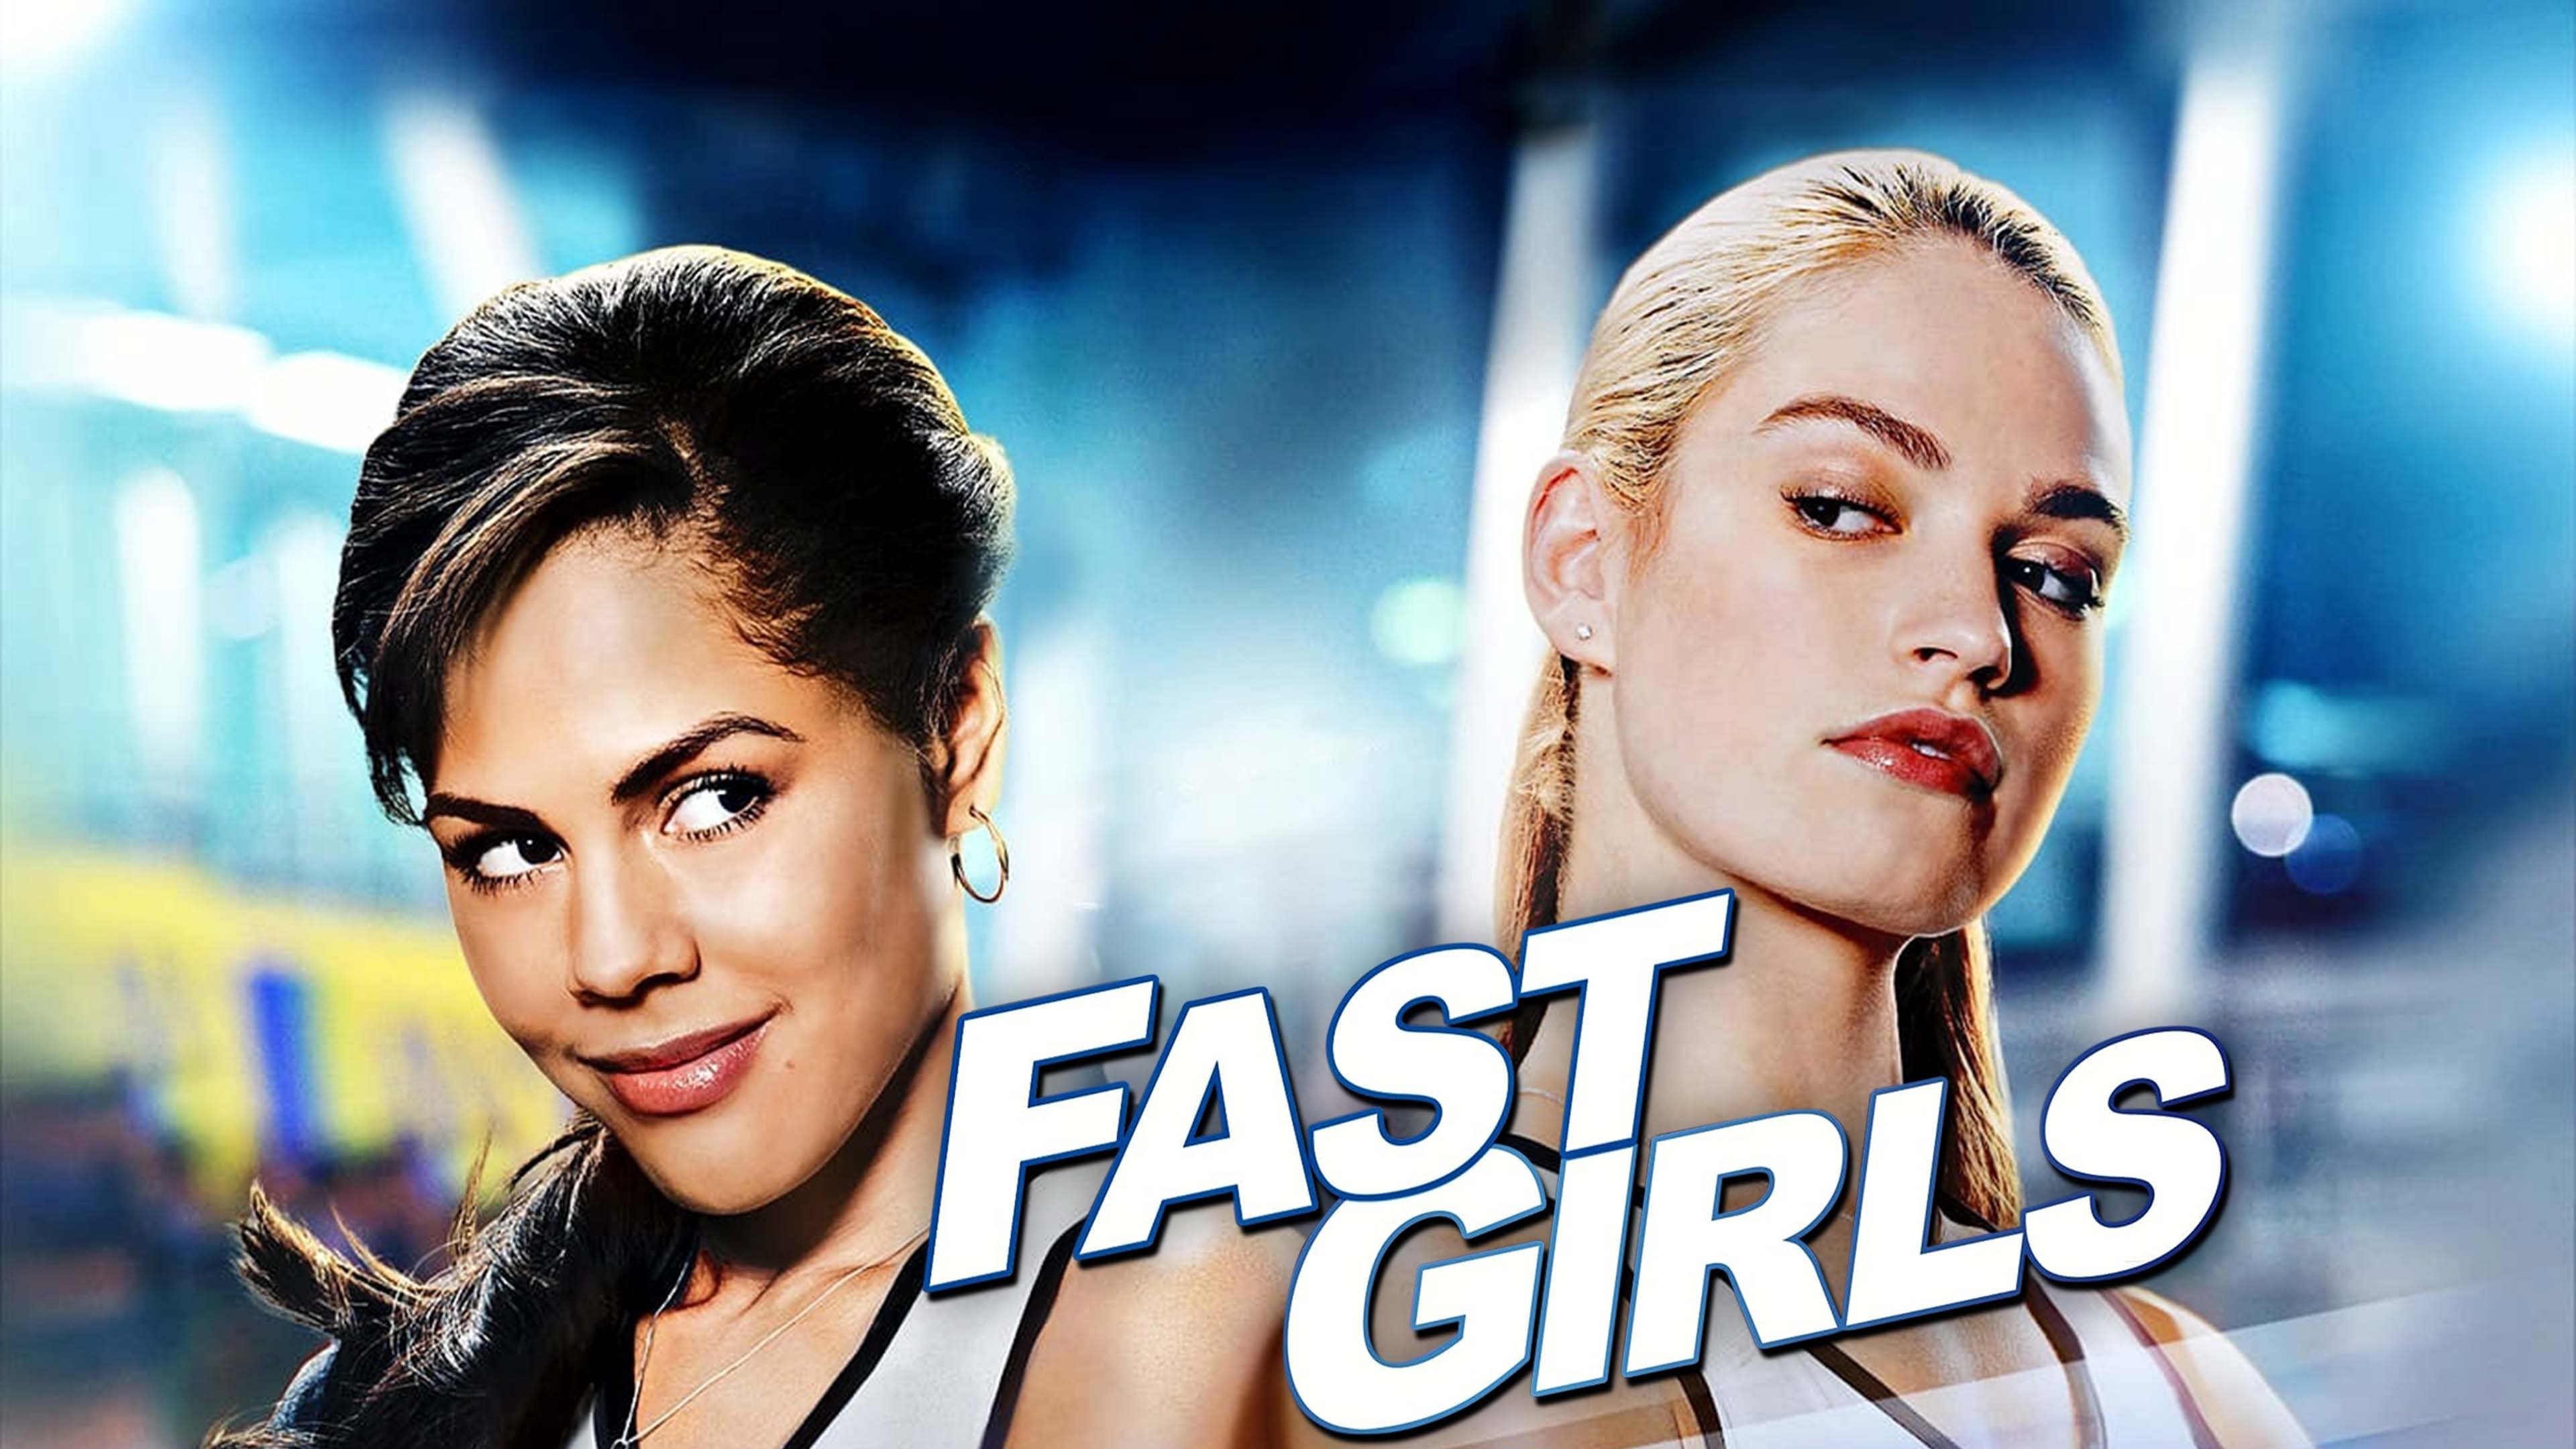 Fast and Female – Girl, You Got This!